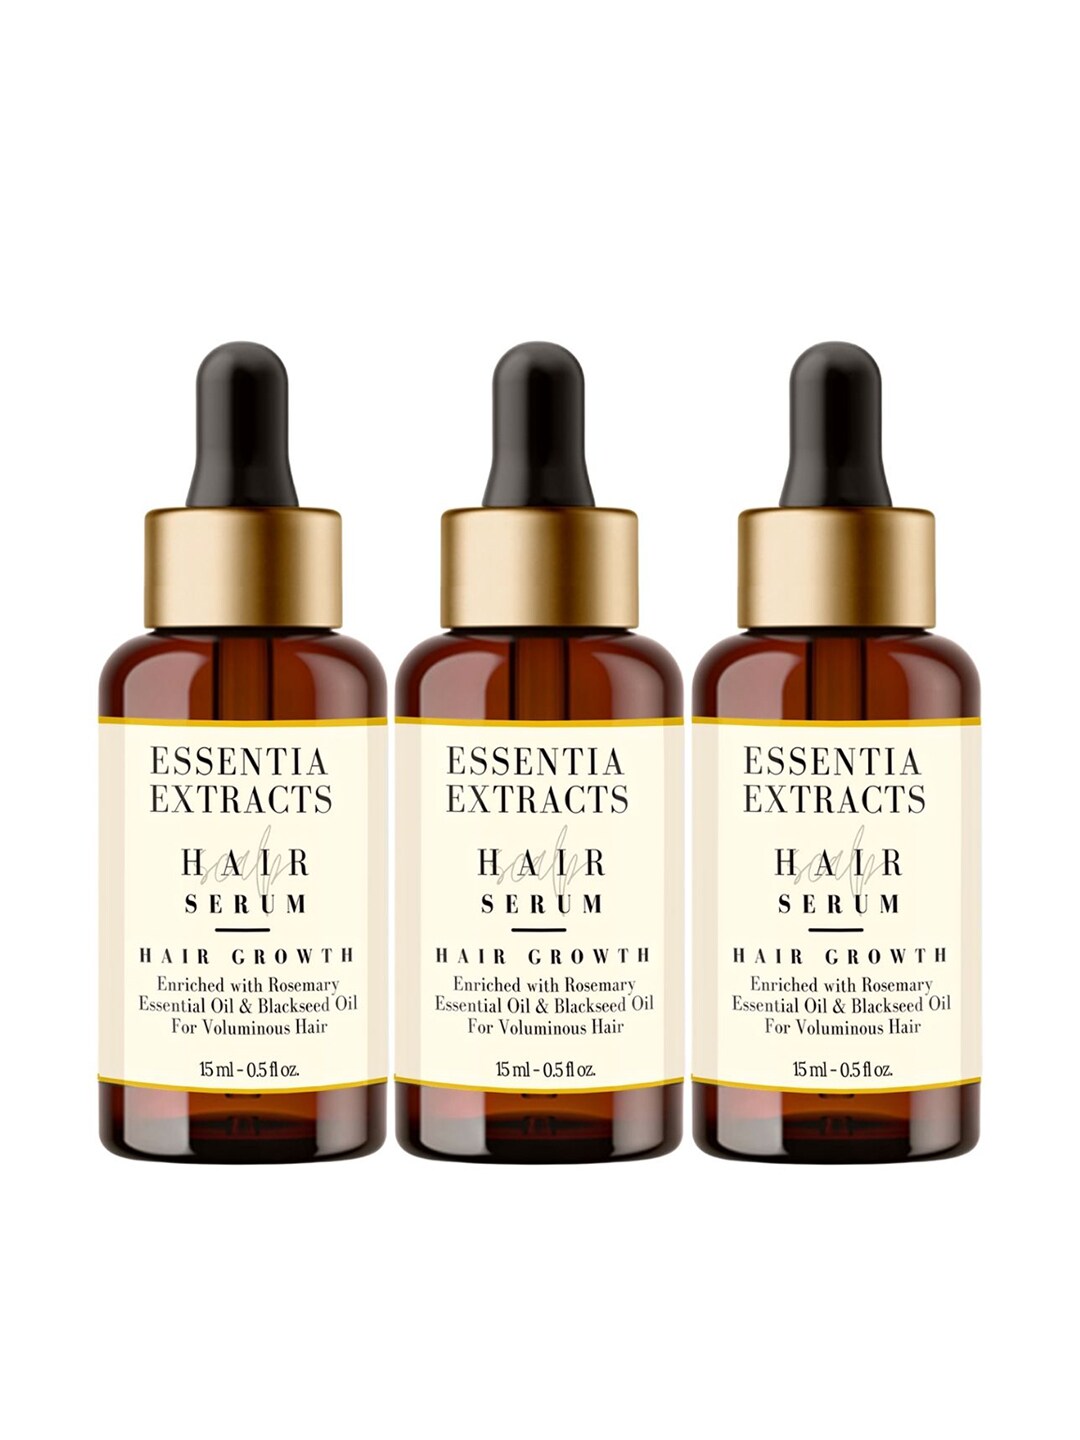 ESSENTIA EXTRACTS Set of 3 Hair Growth Serum for Voluminous Hair - 15 ml Each Price in India